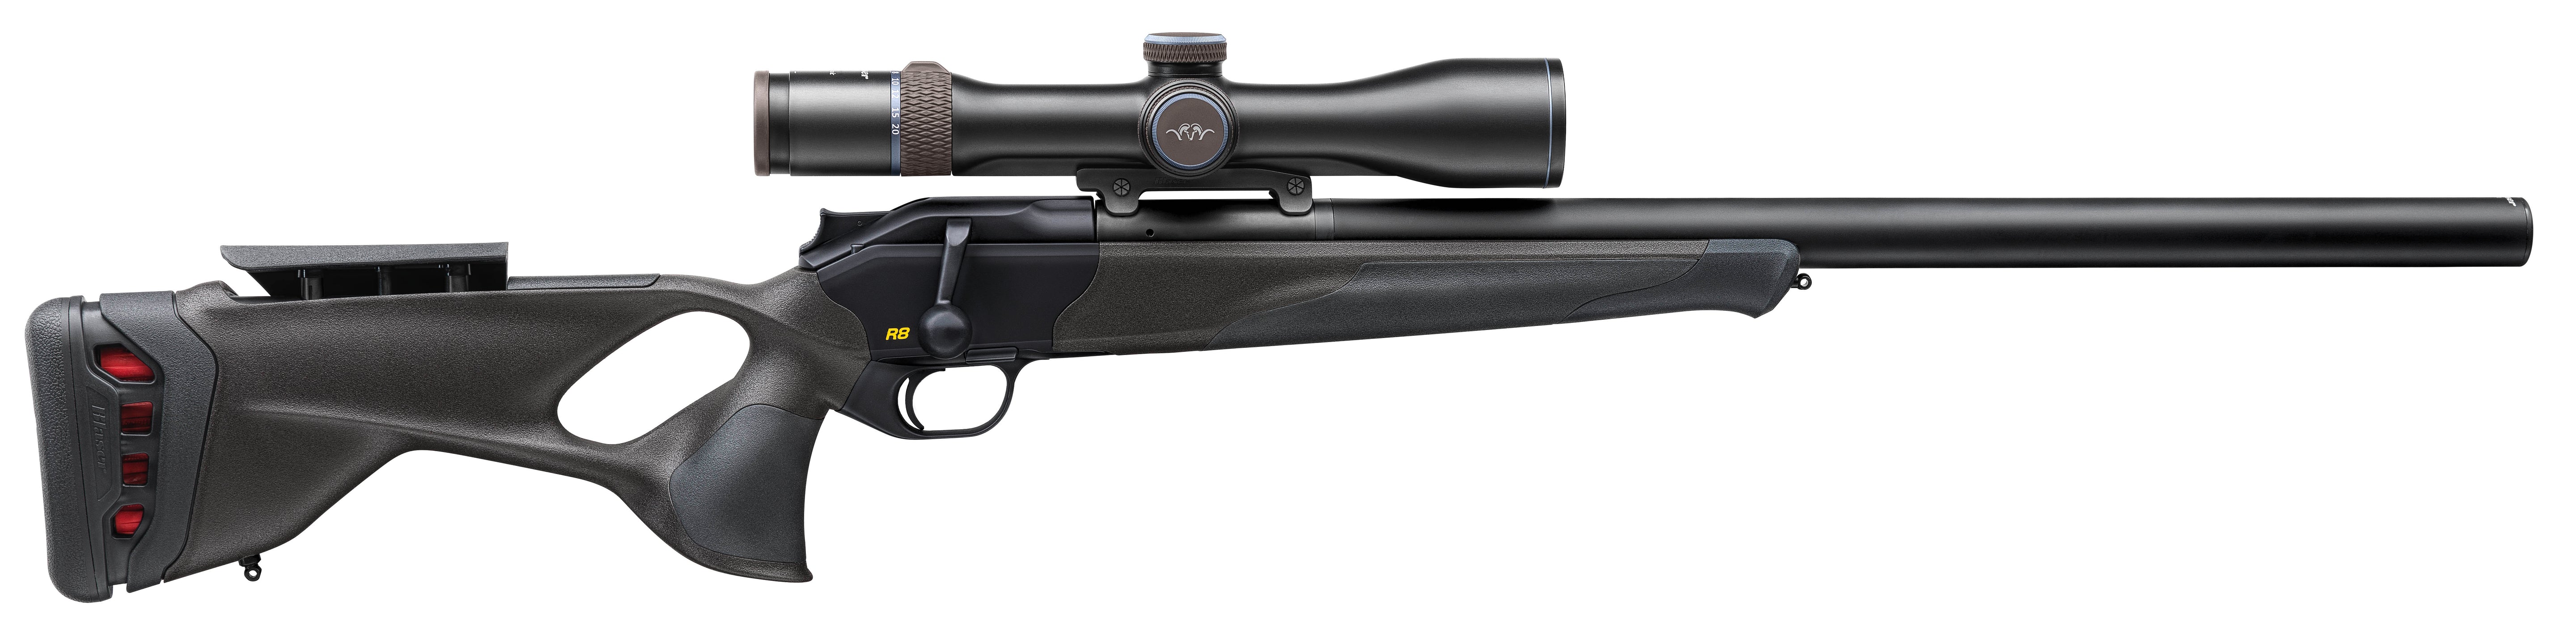 Blaser R8 Ultimate Silence Rifle - Cluny Country Guns